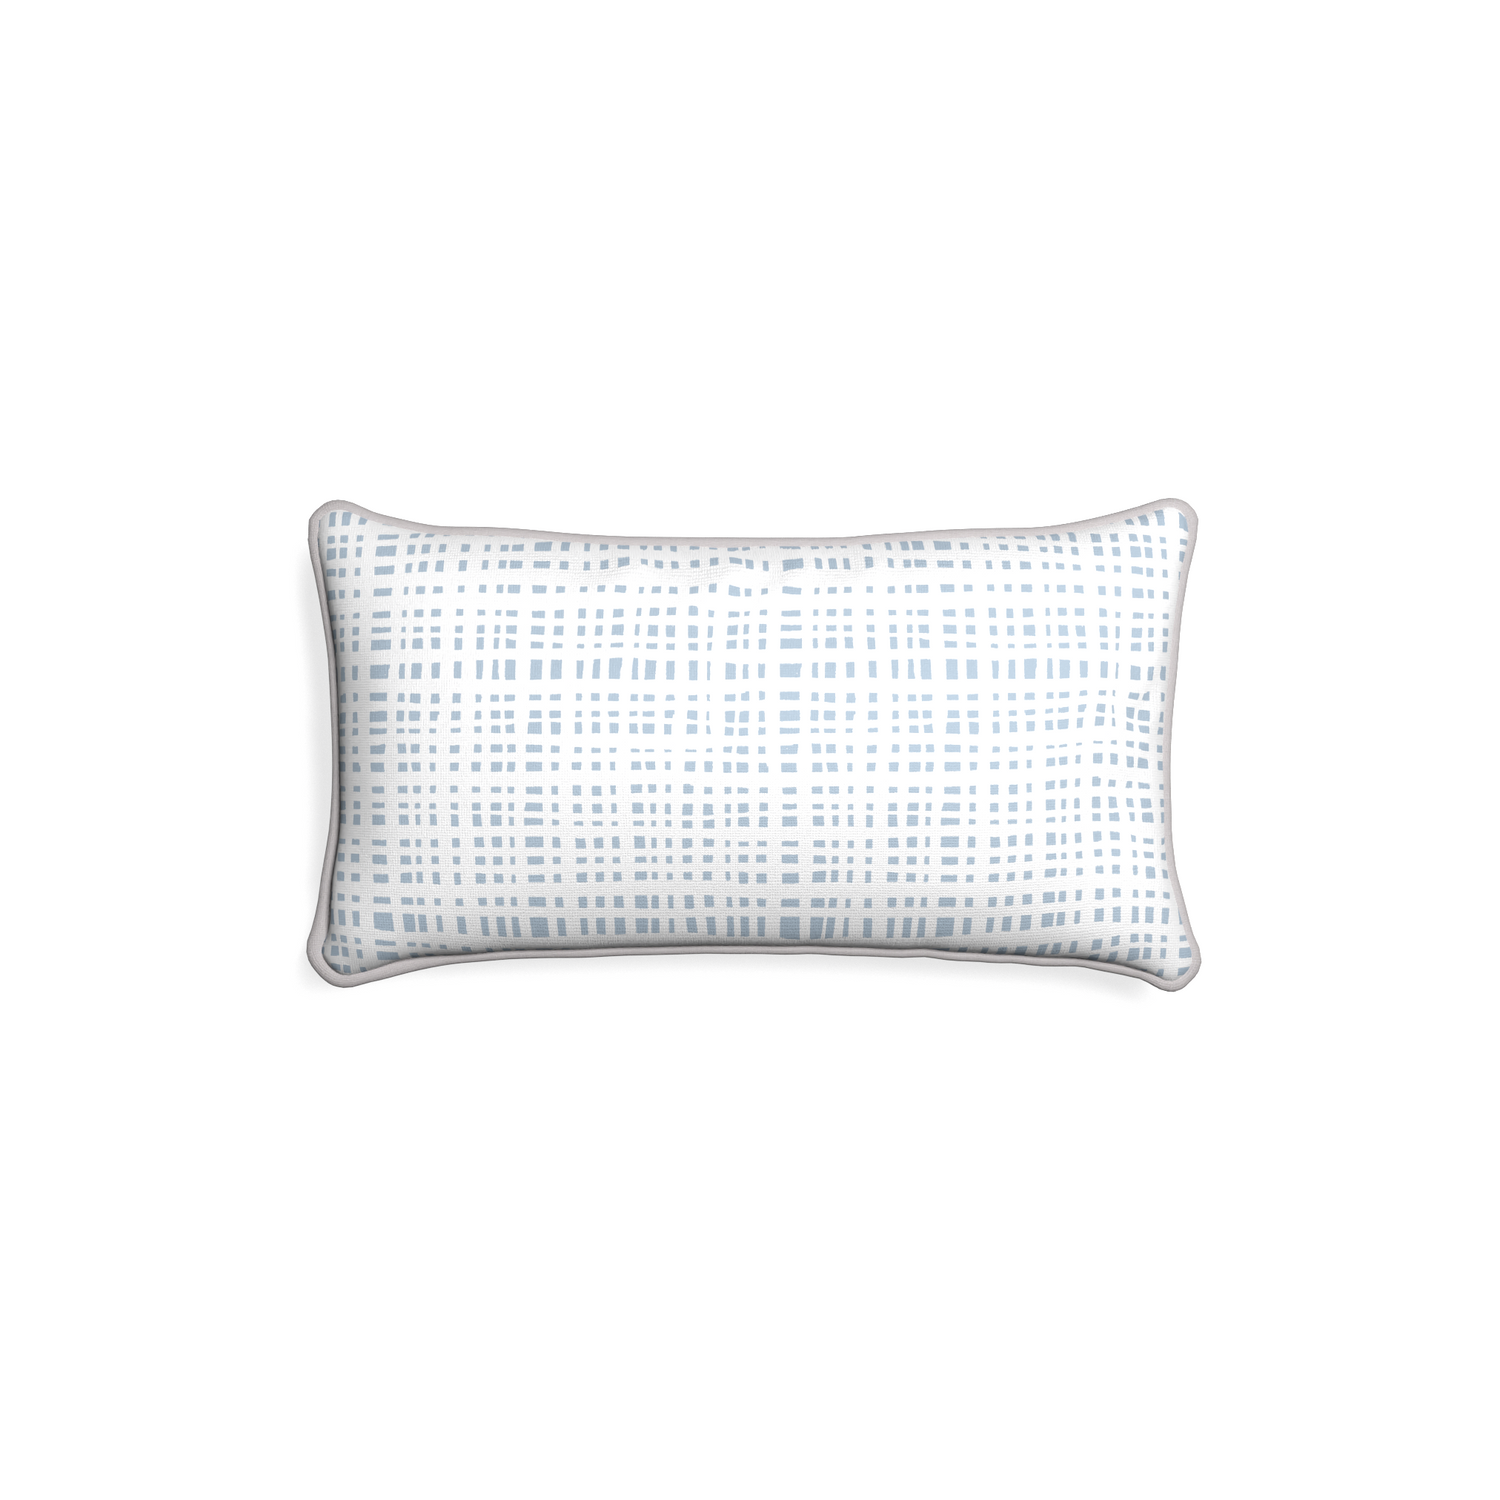 Petite-lumbar ginger sky custom plaid sky bluepillow with pebble piping on white background